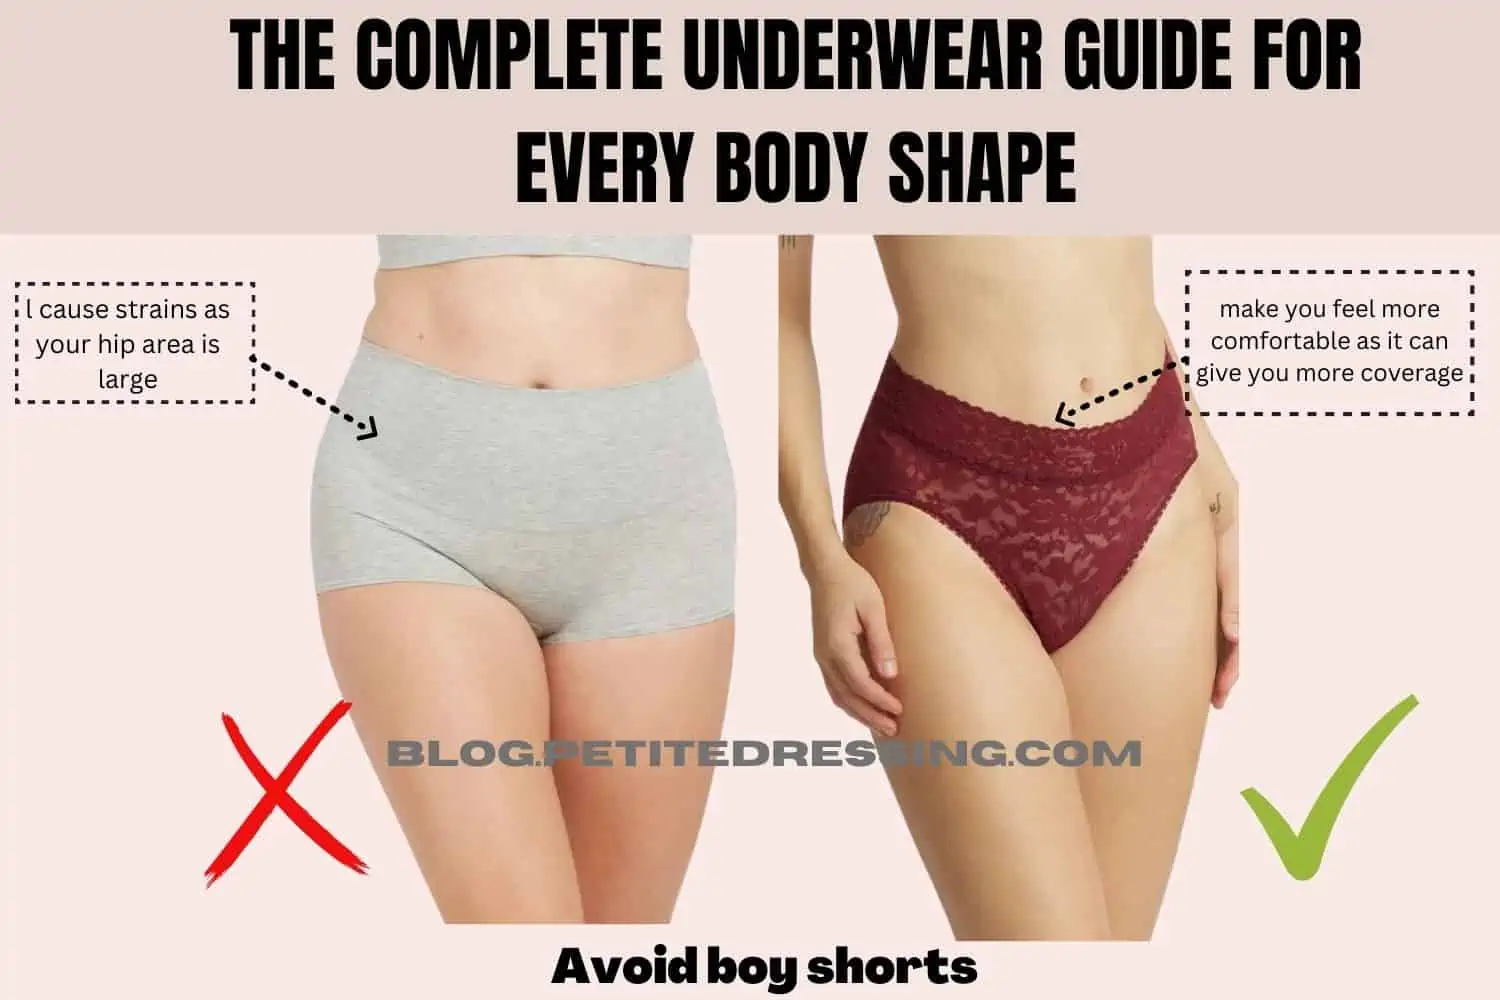 Undie-niable Signs: How to Know if Underwear is Too Small